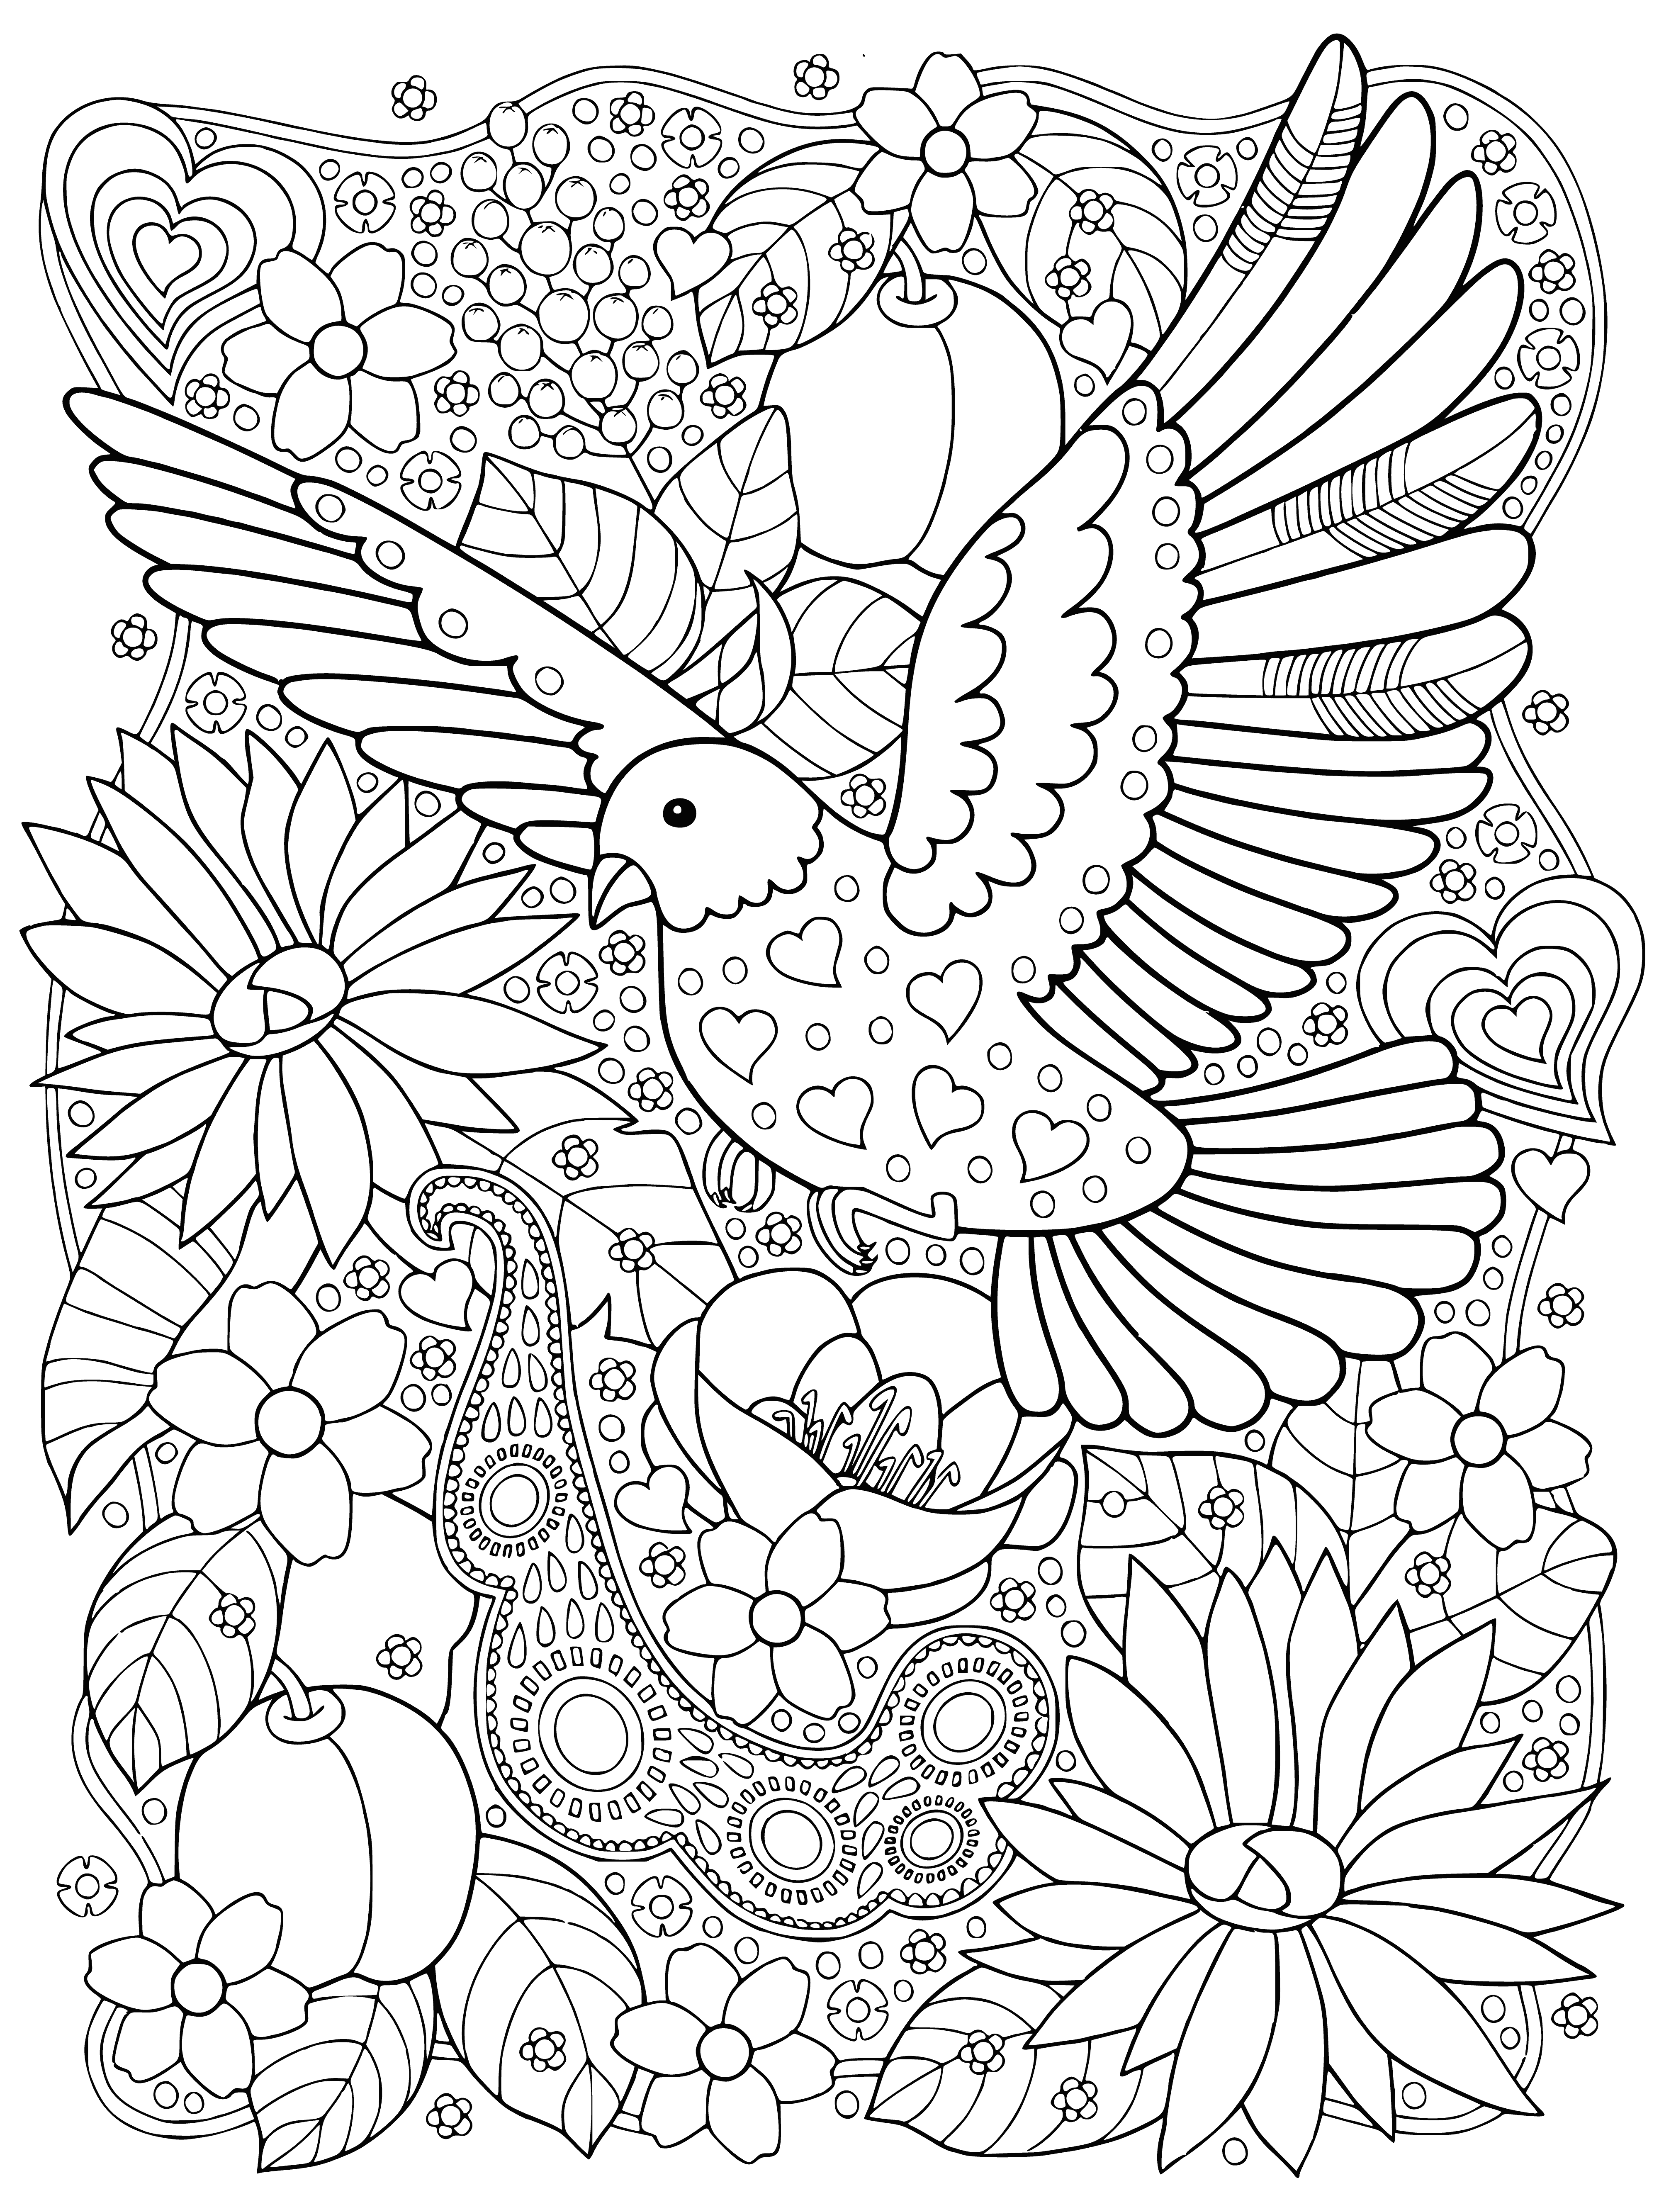 Bird in the garden coloring page